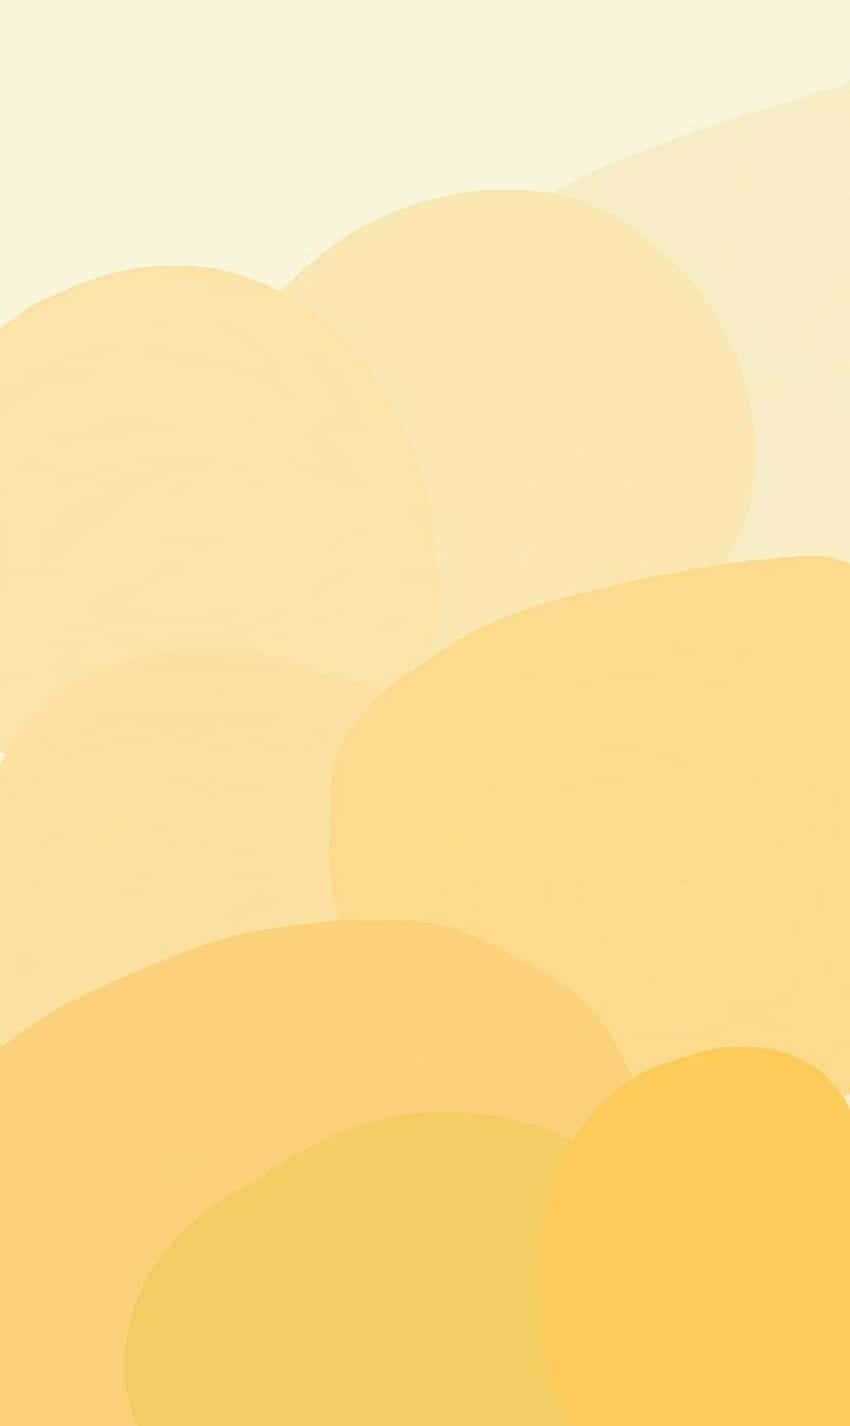 Bright and Warm Aesthetic of a Golden Yellow Sun Wallpaper